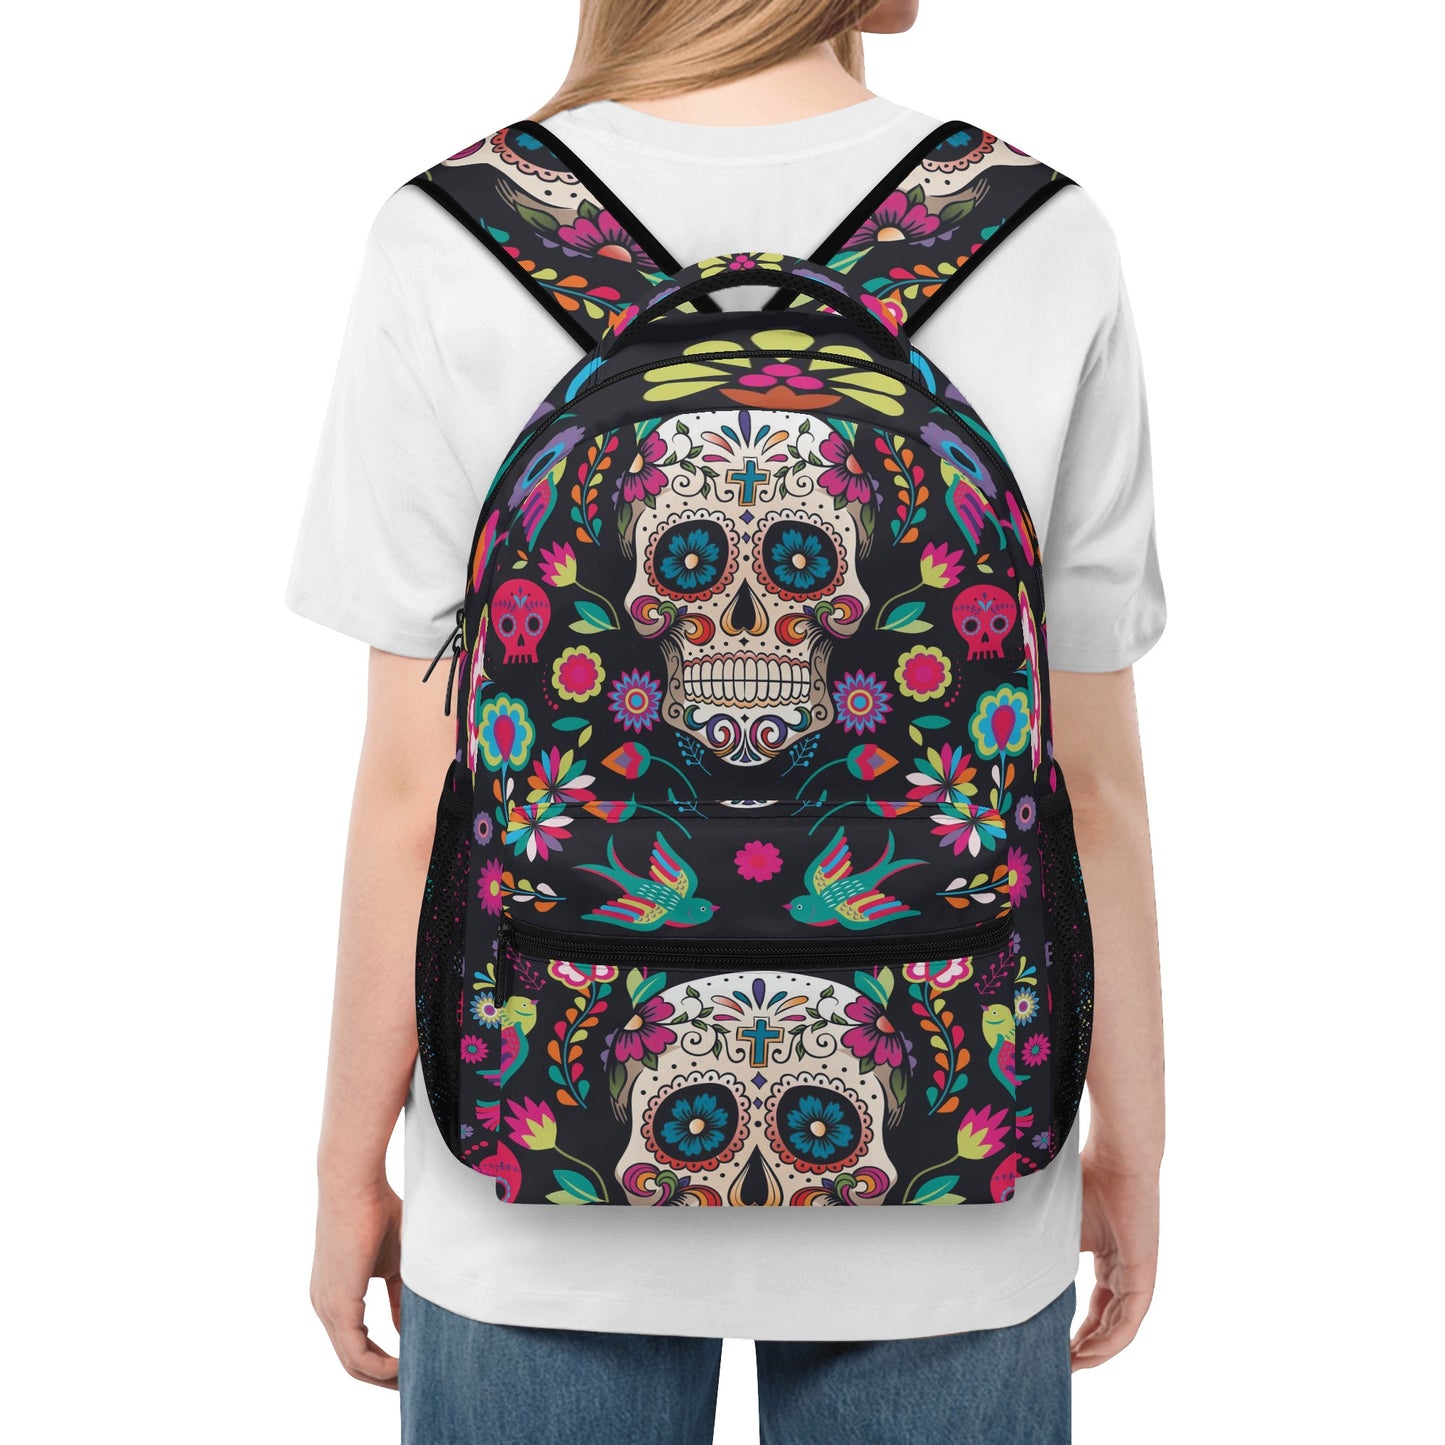 Sugar skull Day of the dead Halloweeen gothic New Casual Style School Bakcpack